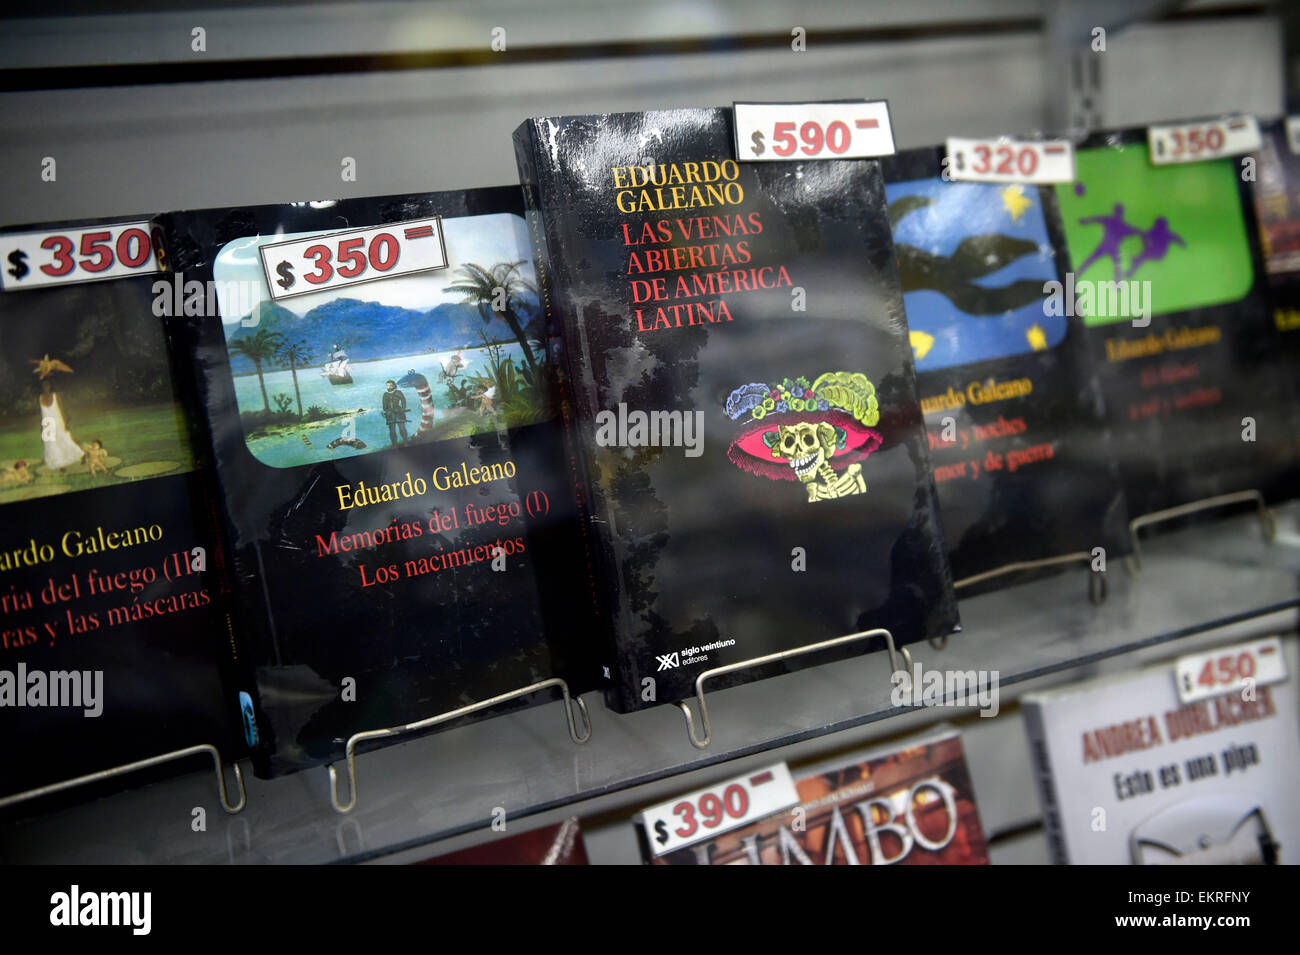 Montevideo, Uruguay. 13th Apr, 2015. Books of Uruguayan writer Eduardo Galeano, are shown in a bookstore, in Montevideo, capital of Uruguay, on April 13, 2015. Uruguayan writer Eduardo Galeano, author of 'Open Veins of Latin America', died on Monday in Montevideo at 74 years old. © Nicolas Celaya/Xinhua/Alamy Live News Stock Photo